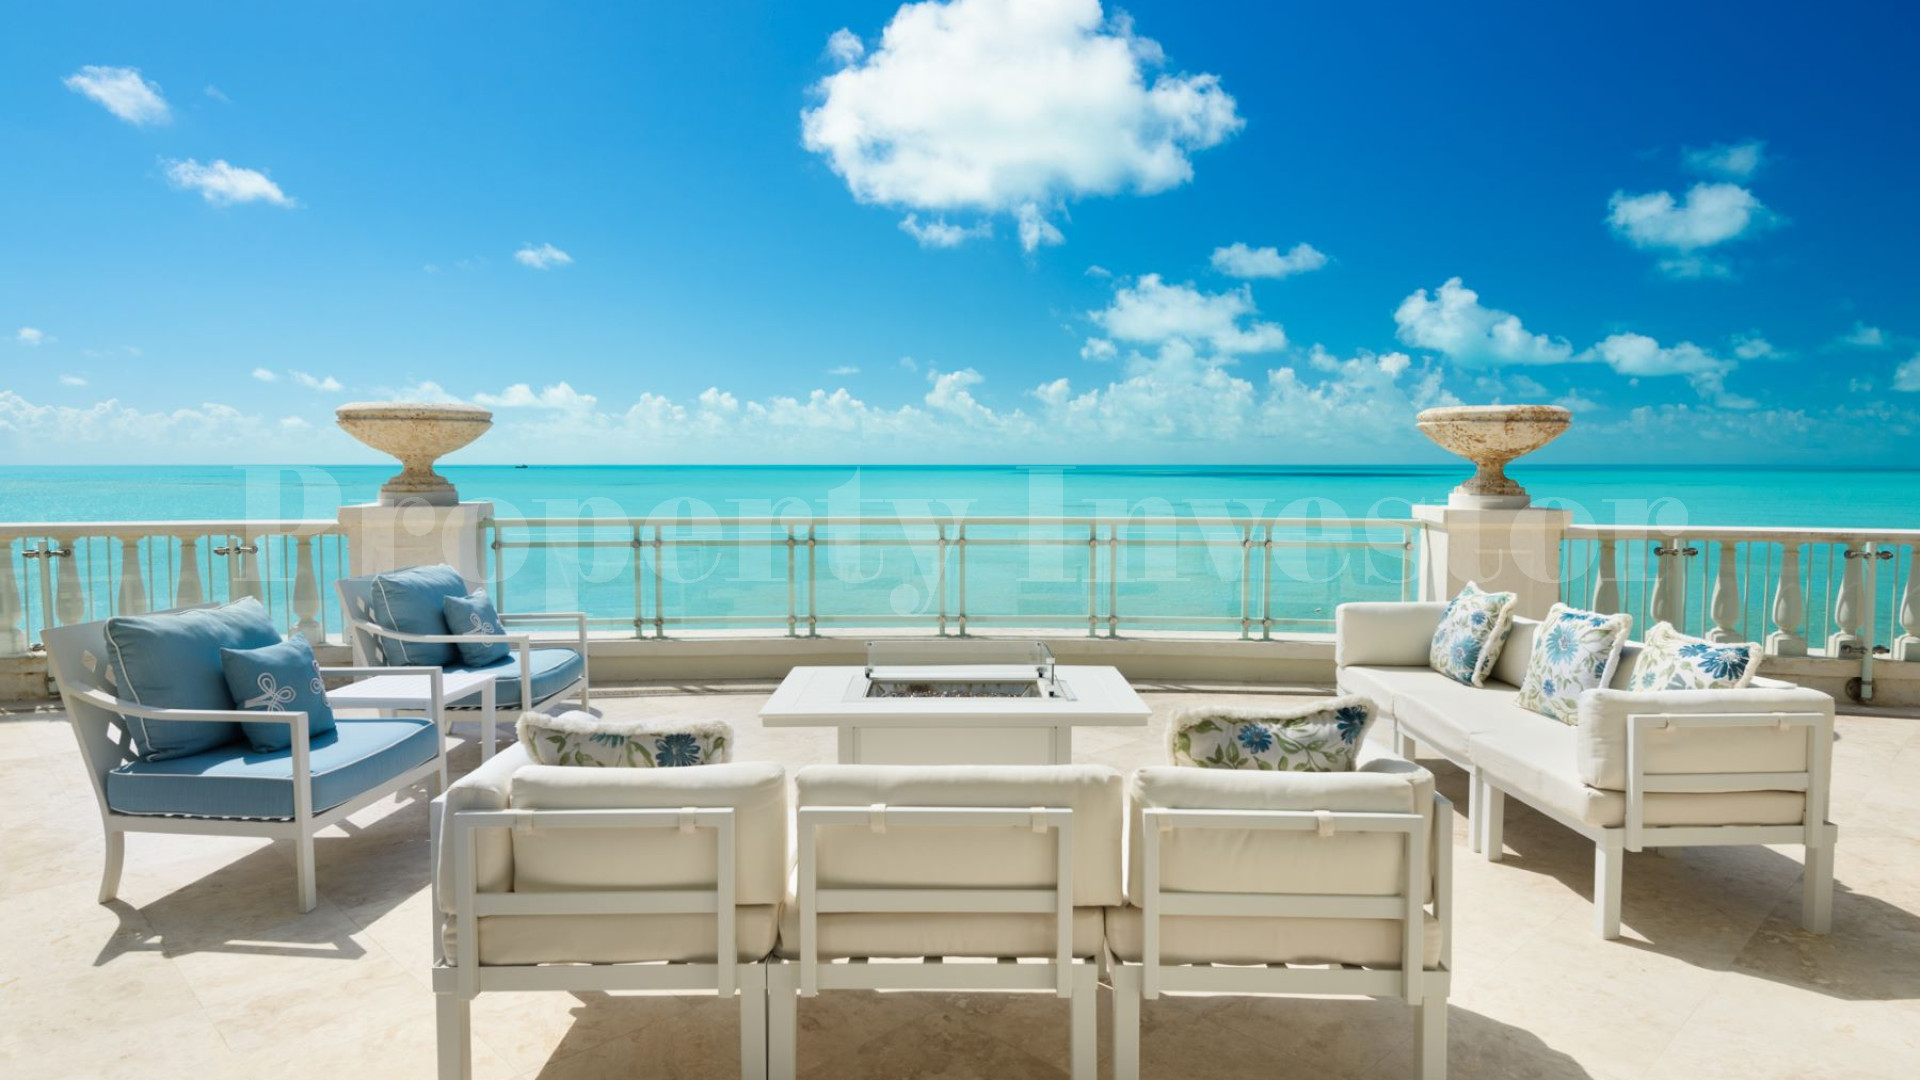 Exclusive 3 Bedroom Luxury Penthouse with Incredible Terrace & Panoramic Views for Sale on Long Bay Beach, Turks & Caicos